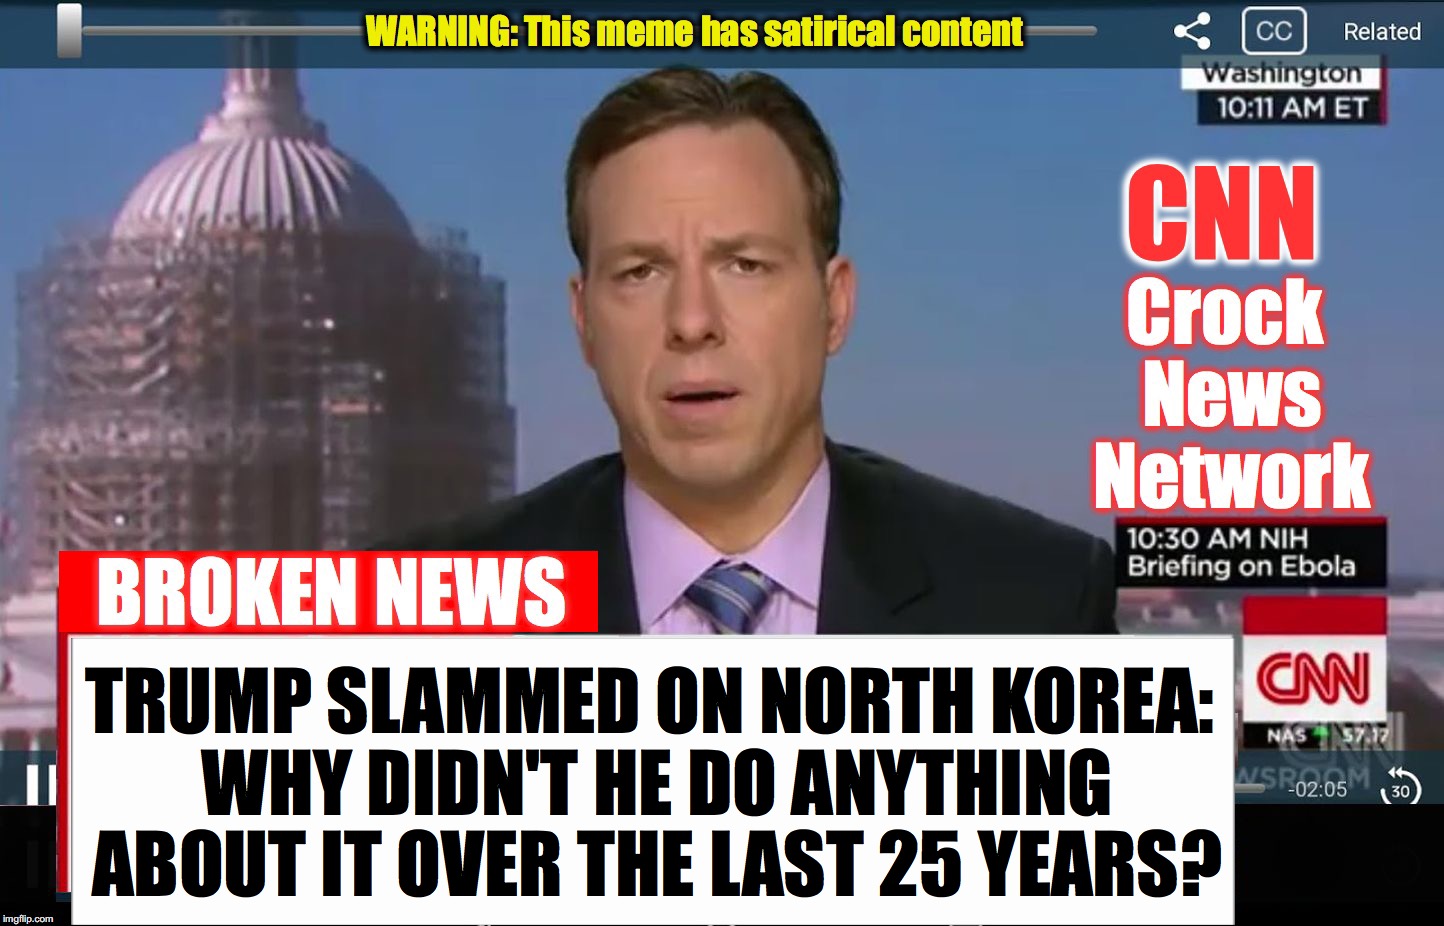 CNN Broken News  | TRUMP SLAMMED ON NORTH KOREA: WHY DIDN'T HE DO ANYTHING ABOUT IT OVER THE LAST 25 YEARS? | image tagged in cnn broken news | made w/ Imgflip meme maker